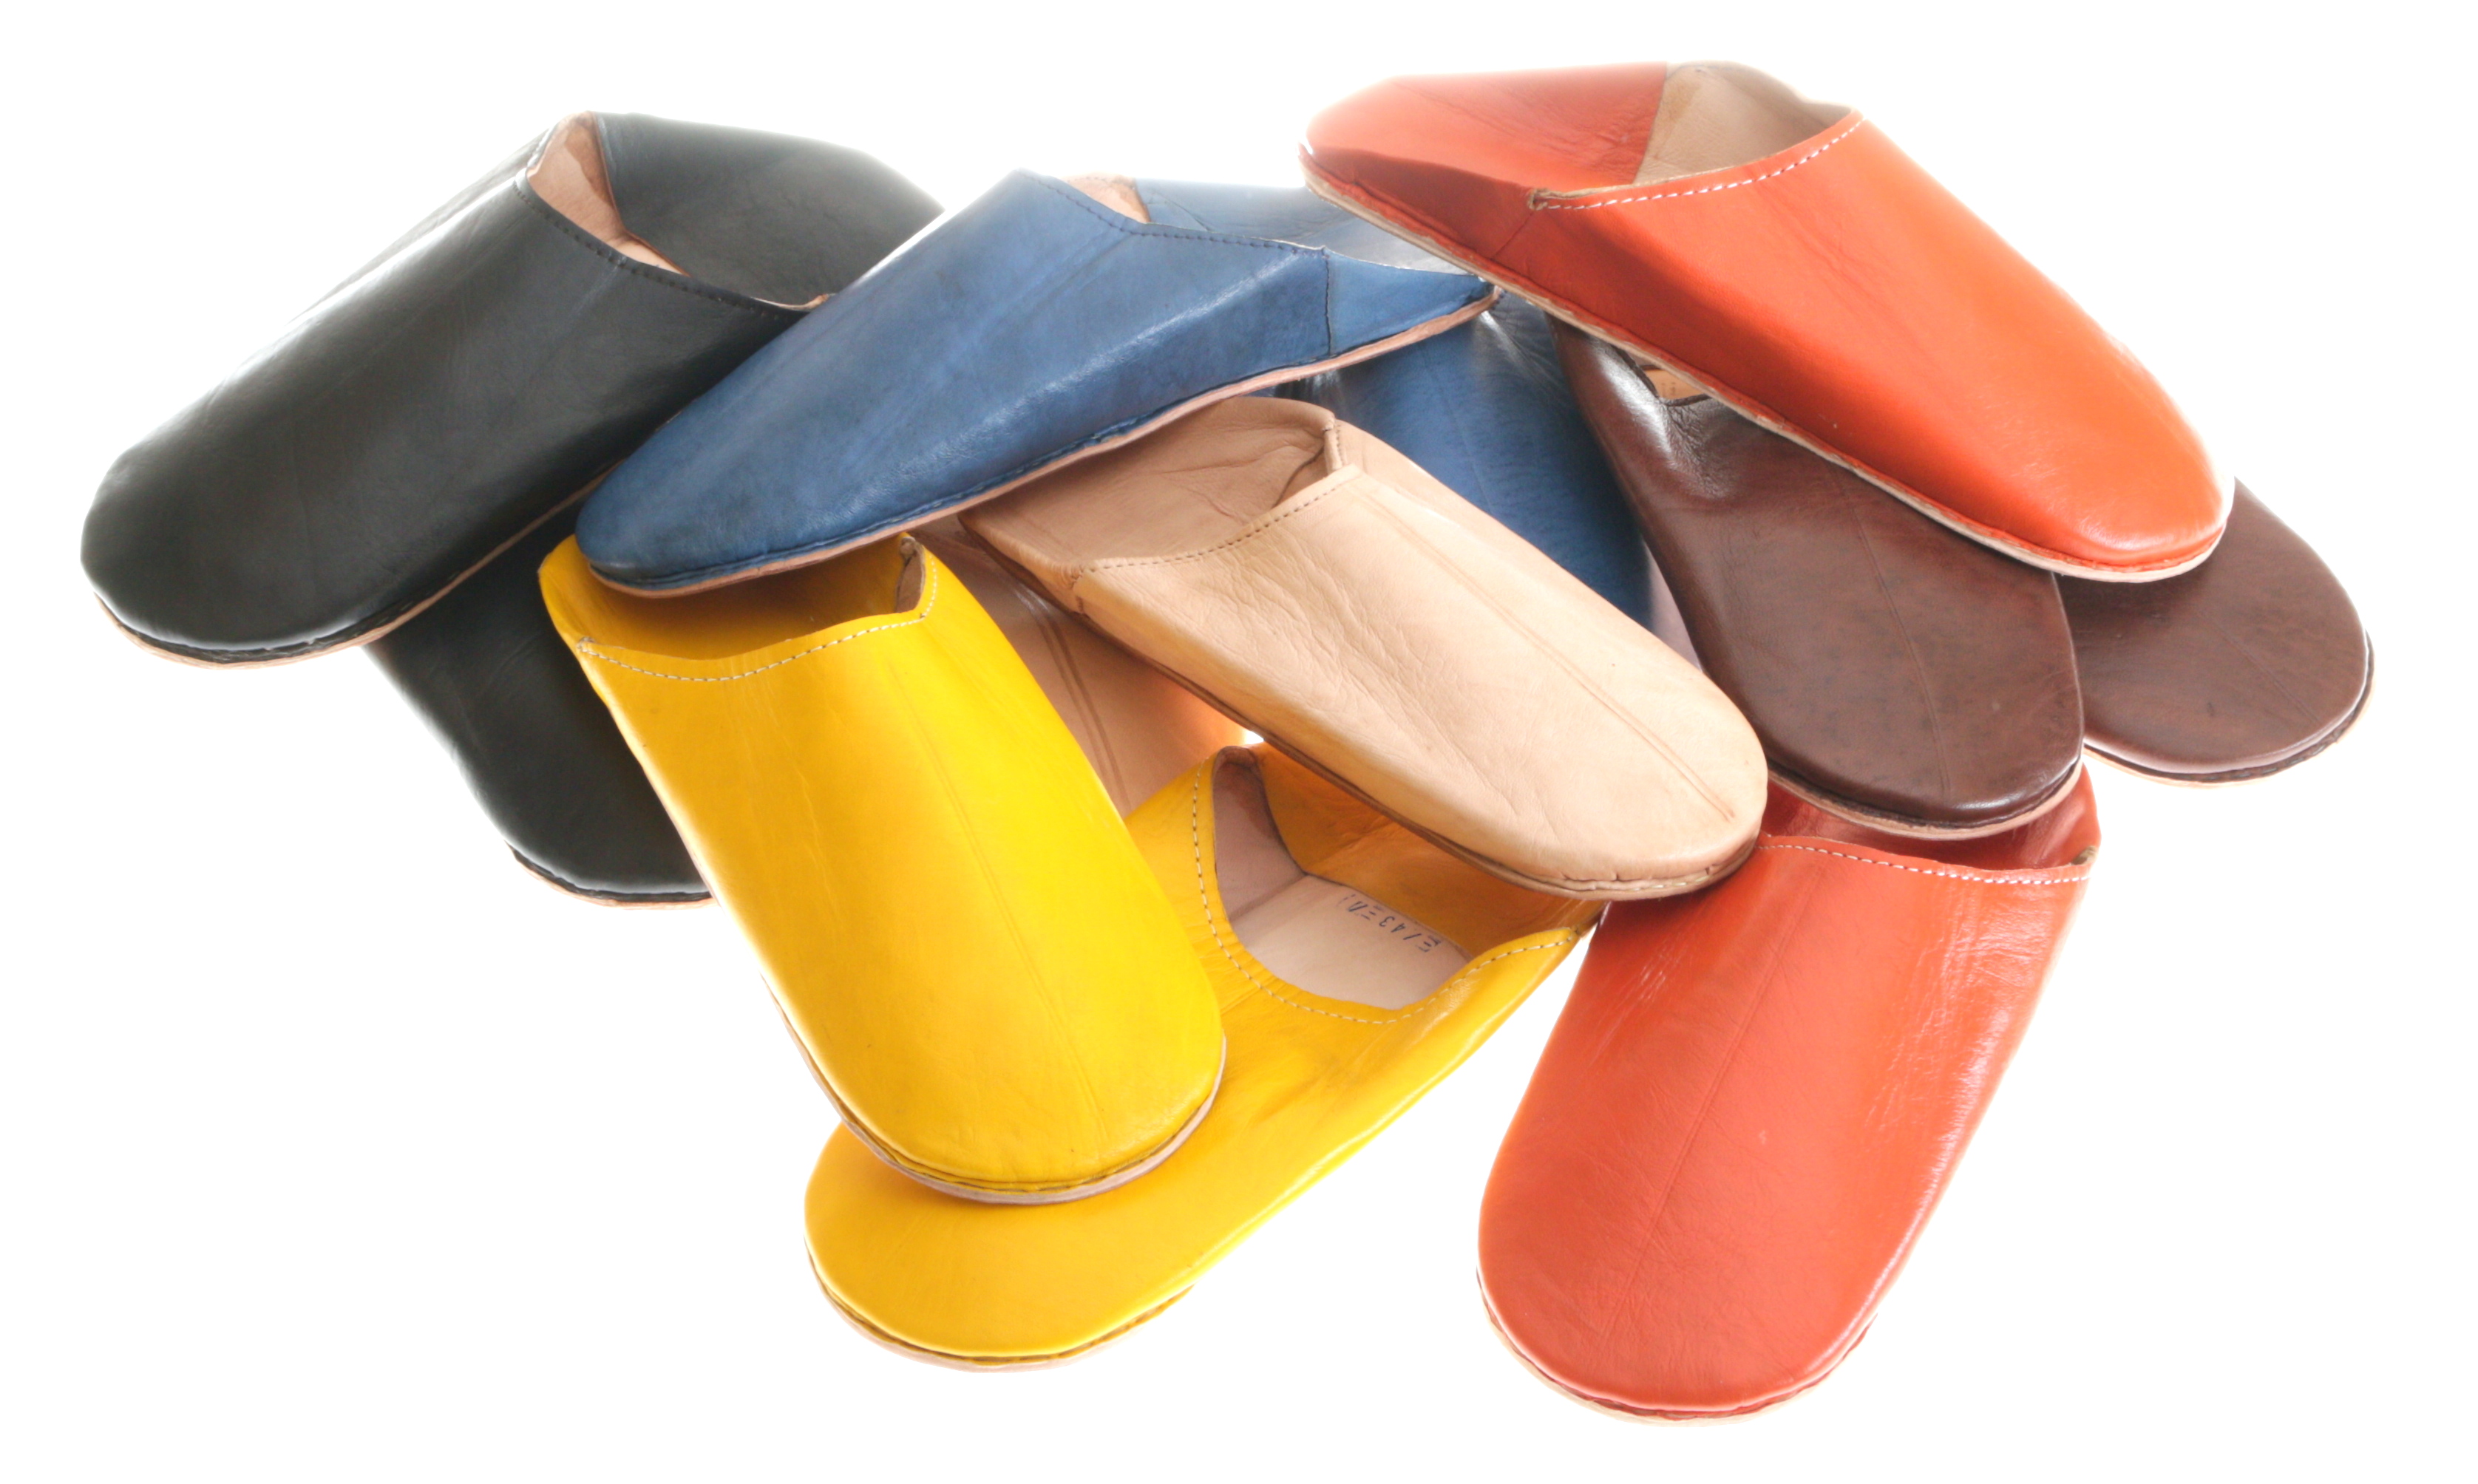 Mules Slides Babouche Organic Leather Shoes Mens Shoes Slippers moroccan babouche leather shoes moroccan slippers Moroccan shoes gift for him. Handmade shoes 